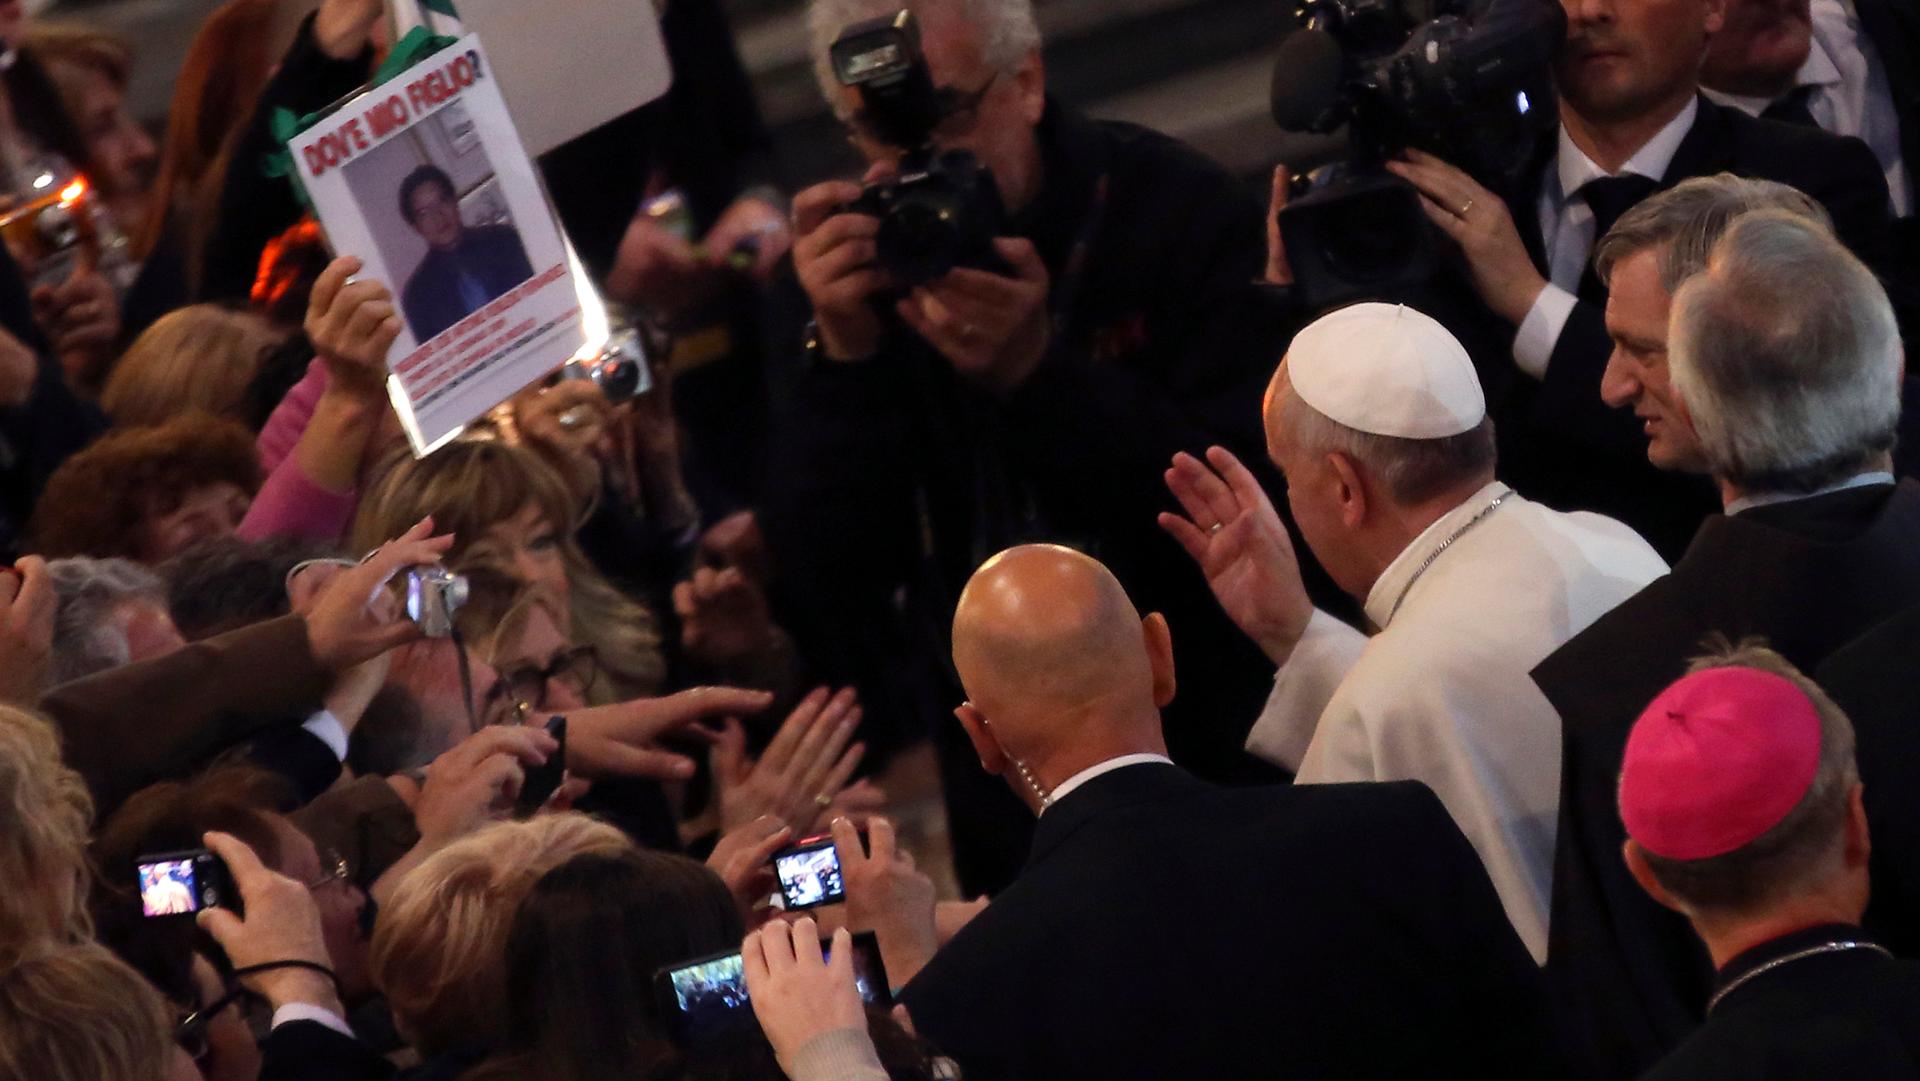 Pope Francis waves to faithful as he arrives to lead an audience with the family members of victims of the mafia at the San Gregorio VII church in Rome. A woman shows a picture of her son with the words, "Where is my son?"